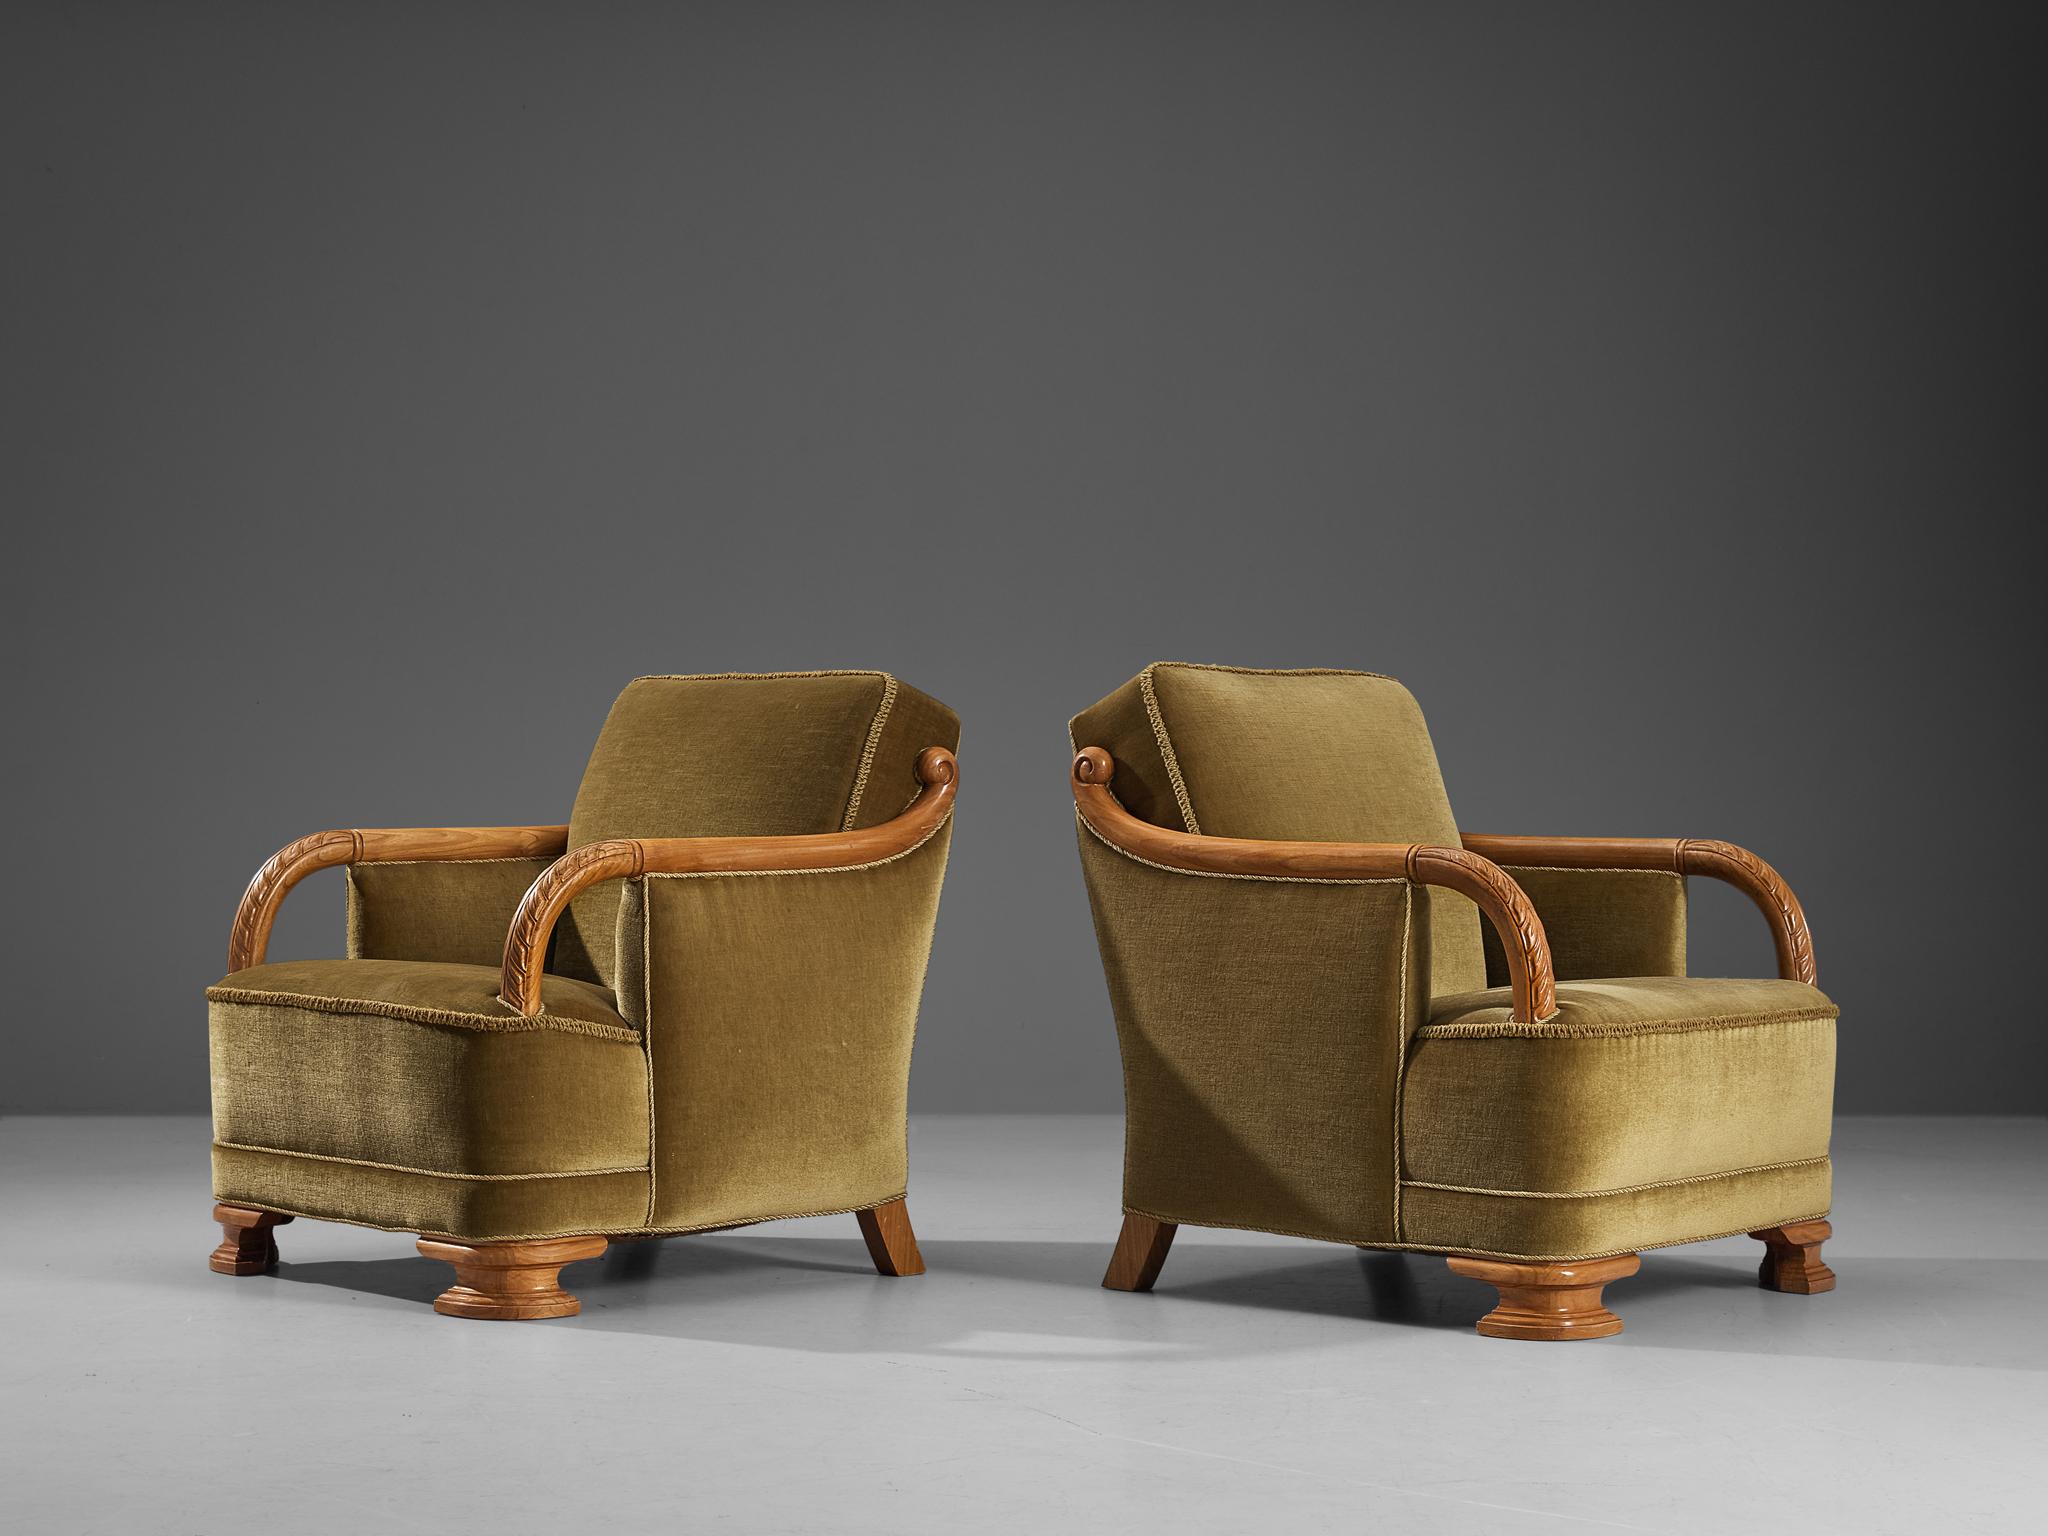 Pair of easy chairs, velvet, elm, Denmark, circa. 1940 

This rare pair of lounge chairs of Danish origin comes with an olive green velvet upholstery that beautifully blends in with the warm tone of the wooden frame executed in elm. The design is